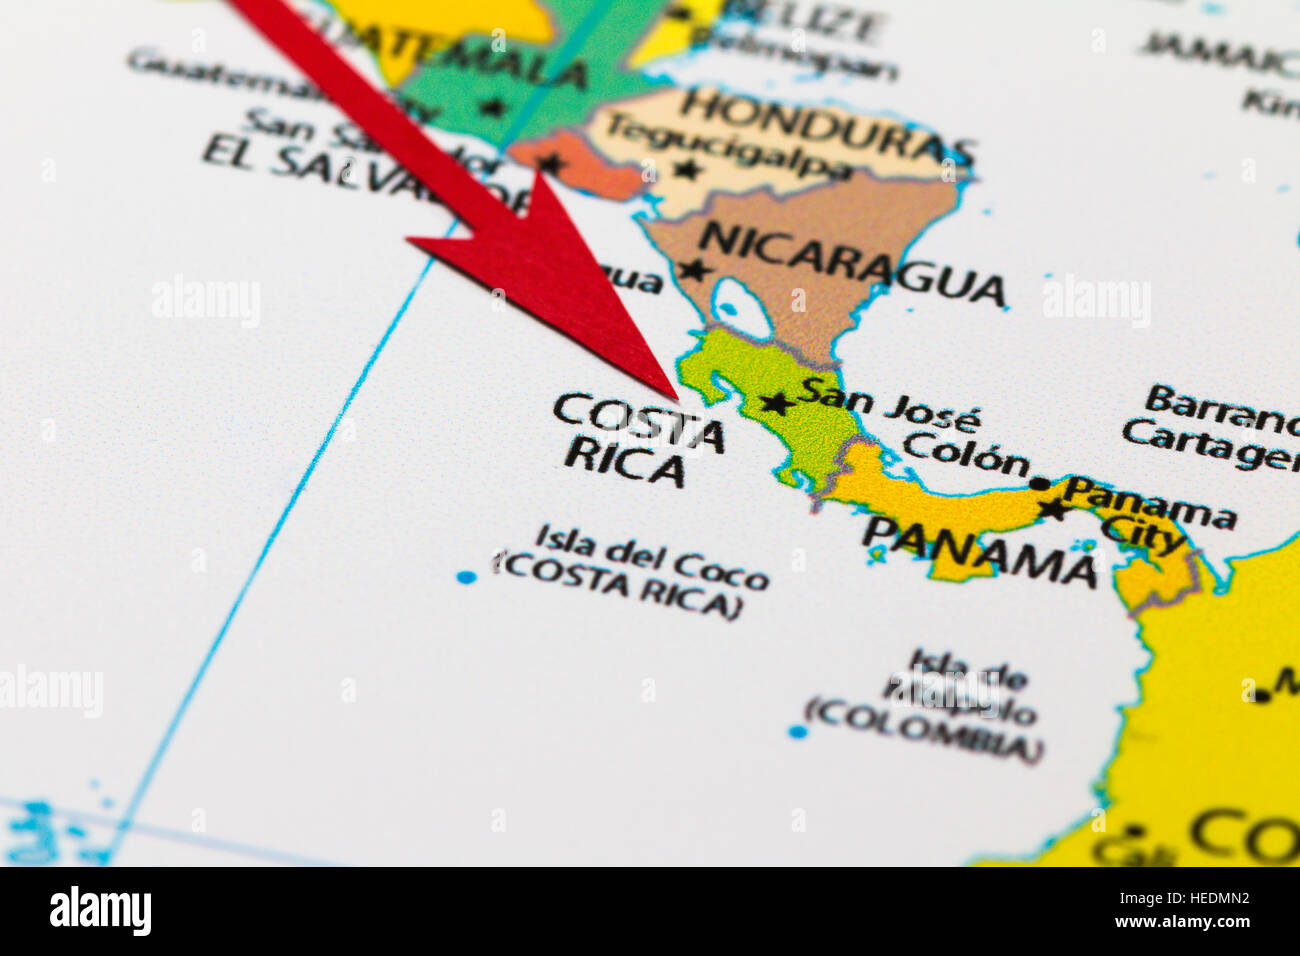 red-arrow-pointing-costa-rica-on-the-map-of-south-america-continent-HEDMN2.jpg